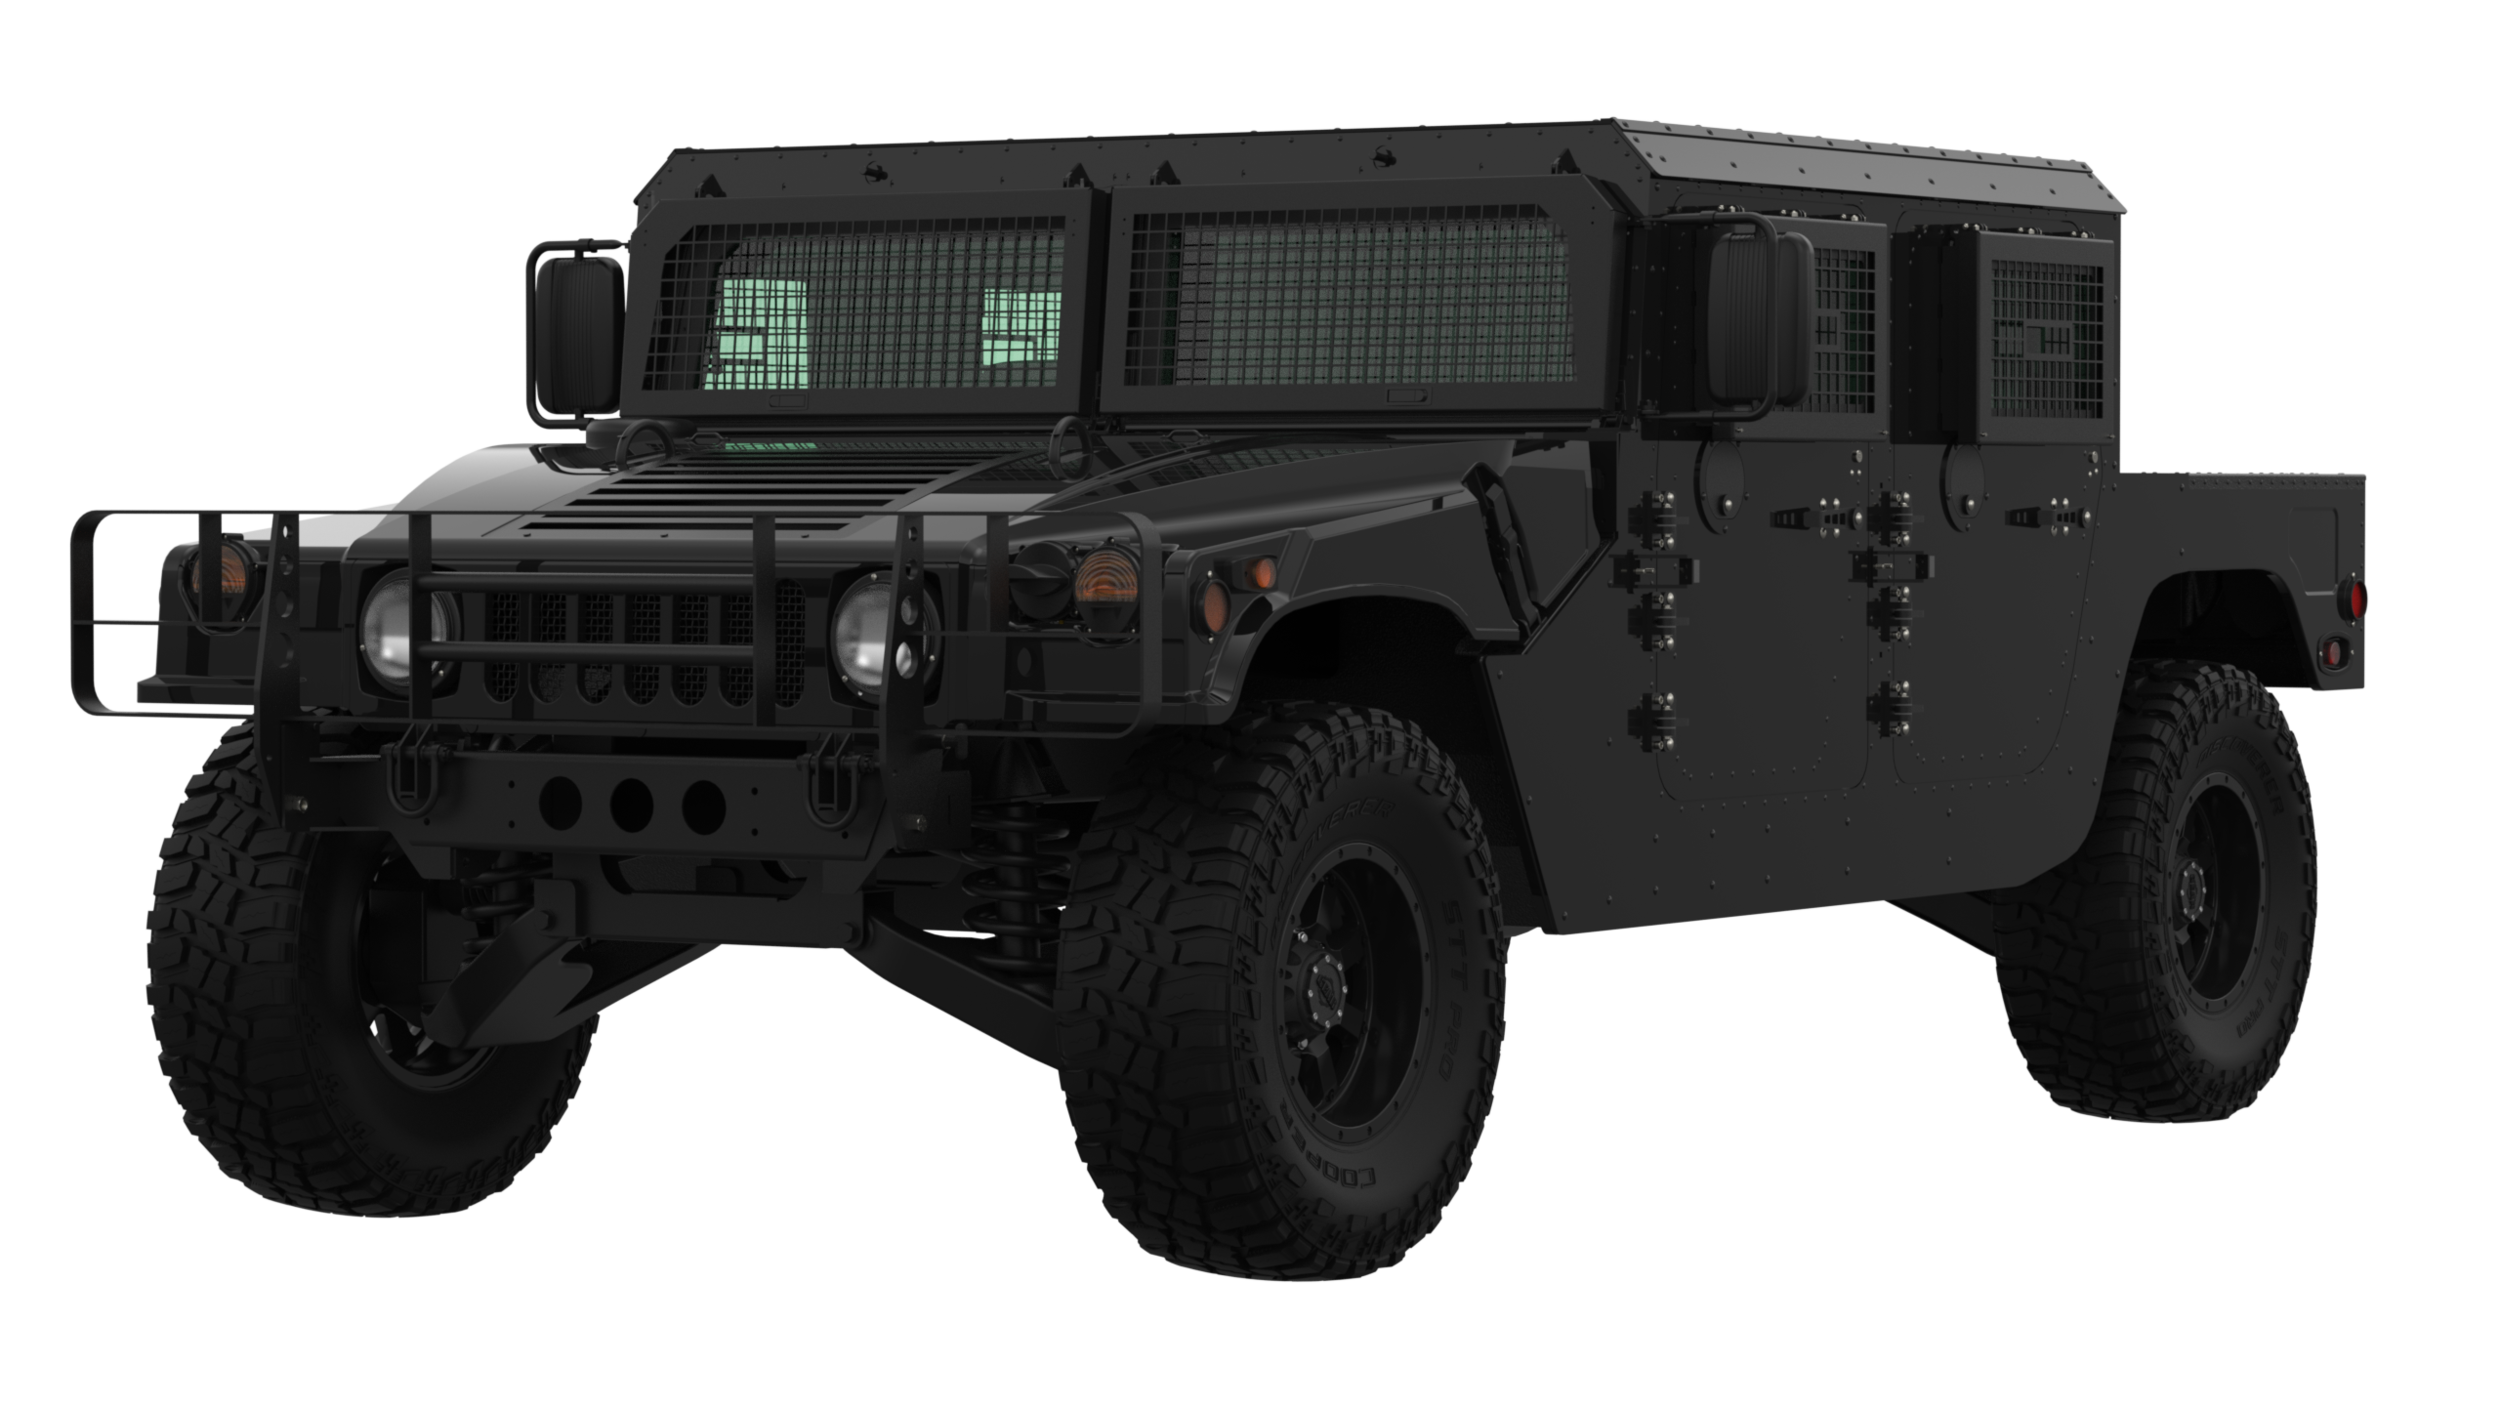 Build Your Riot Armored Humvee From Plan B Trucks